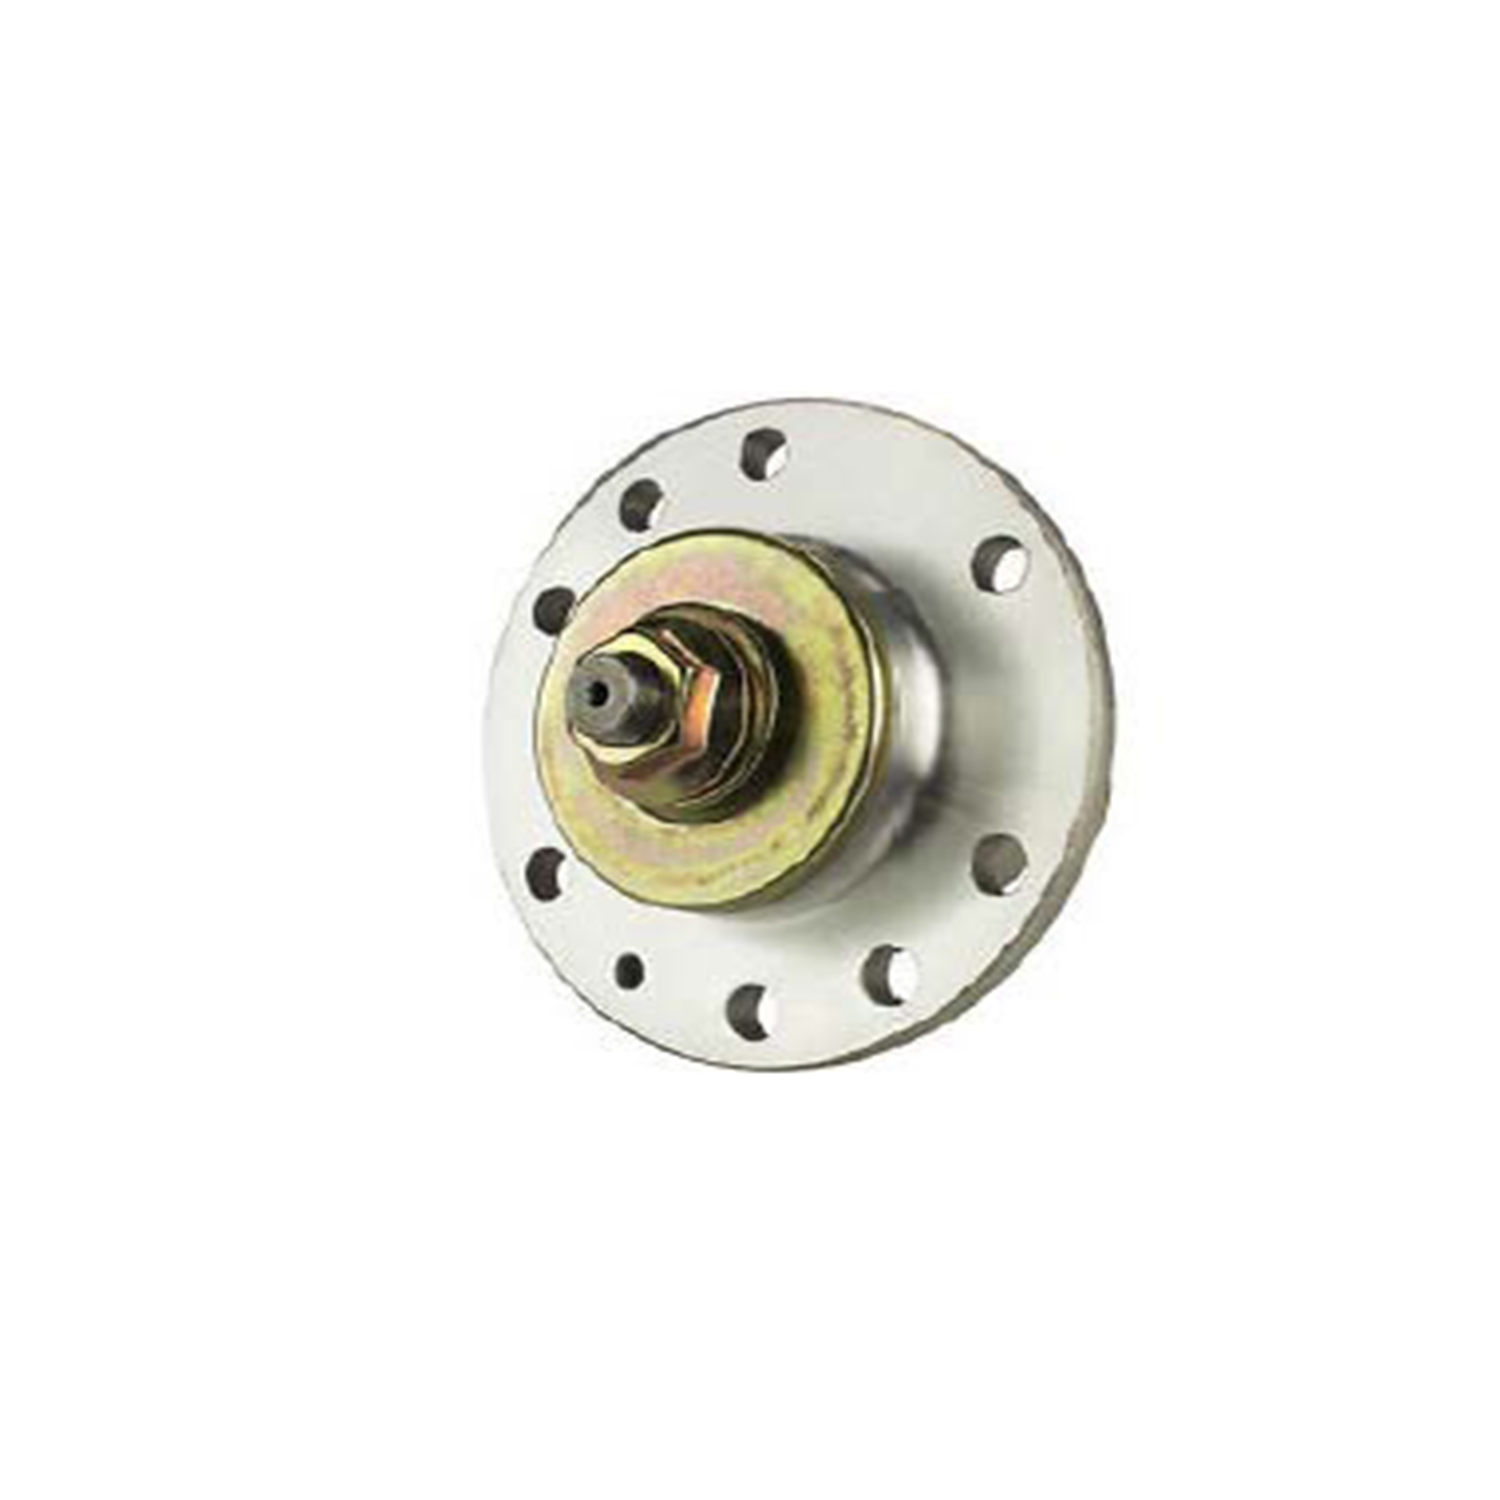 Exmark 1-644092 pulley Spindle assembly  replaces Exmark 1-644092